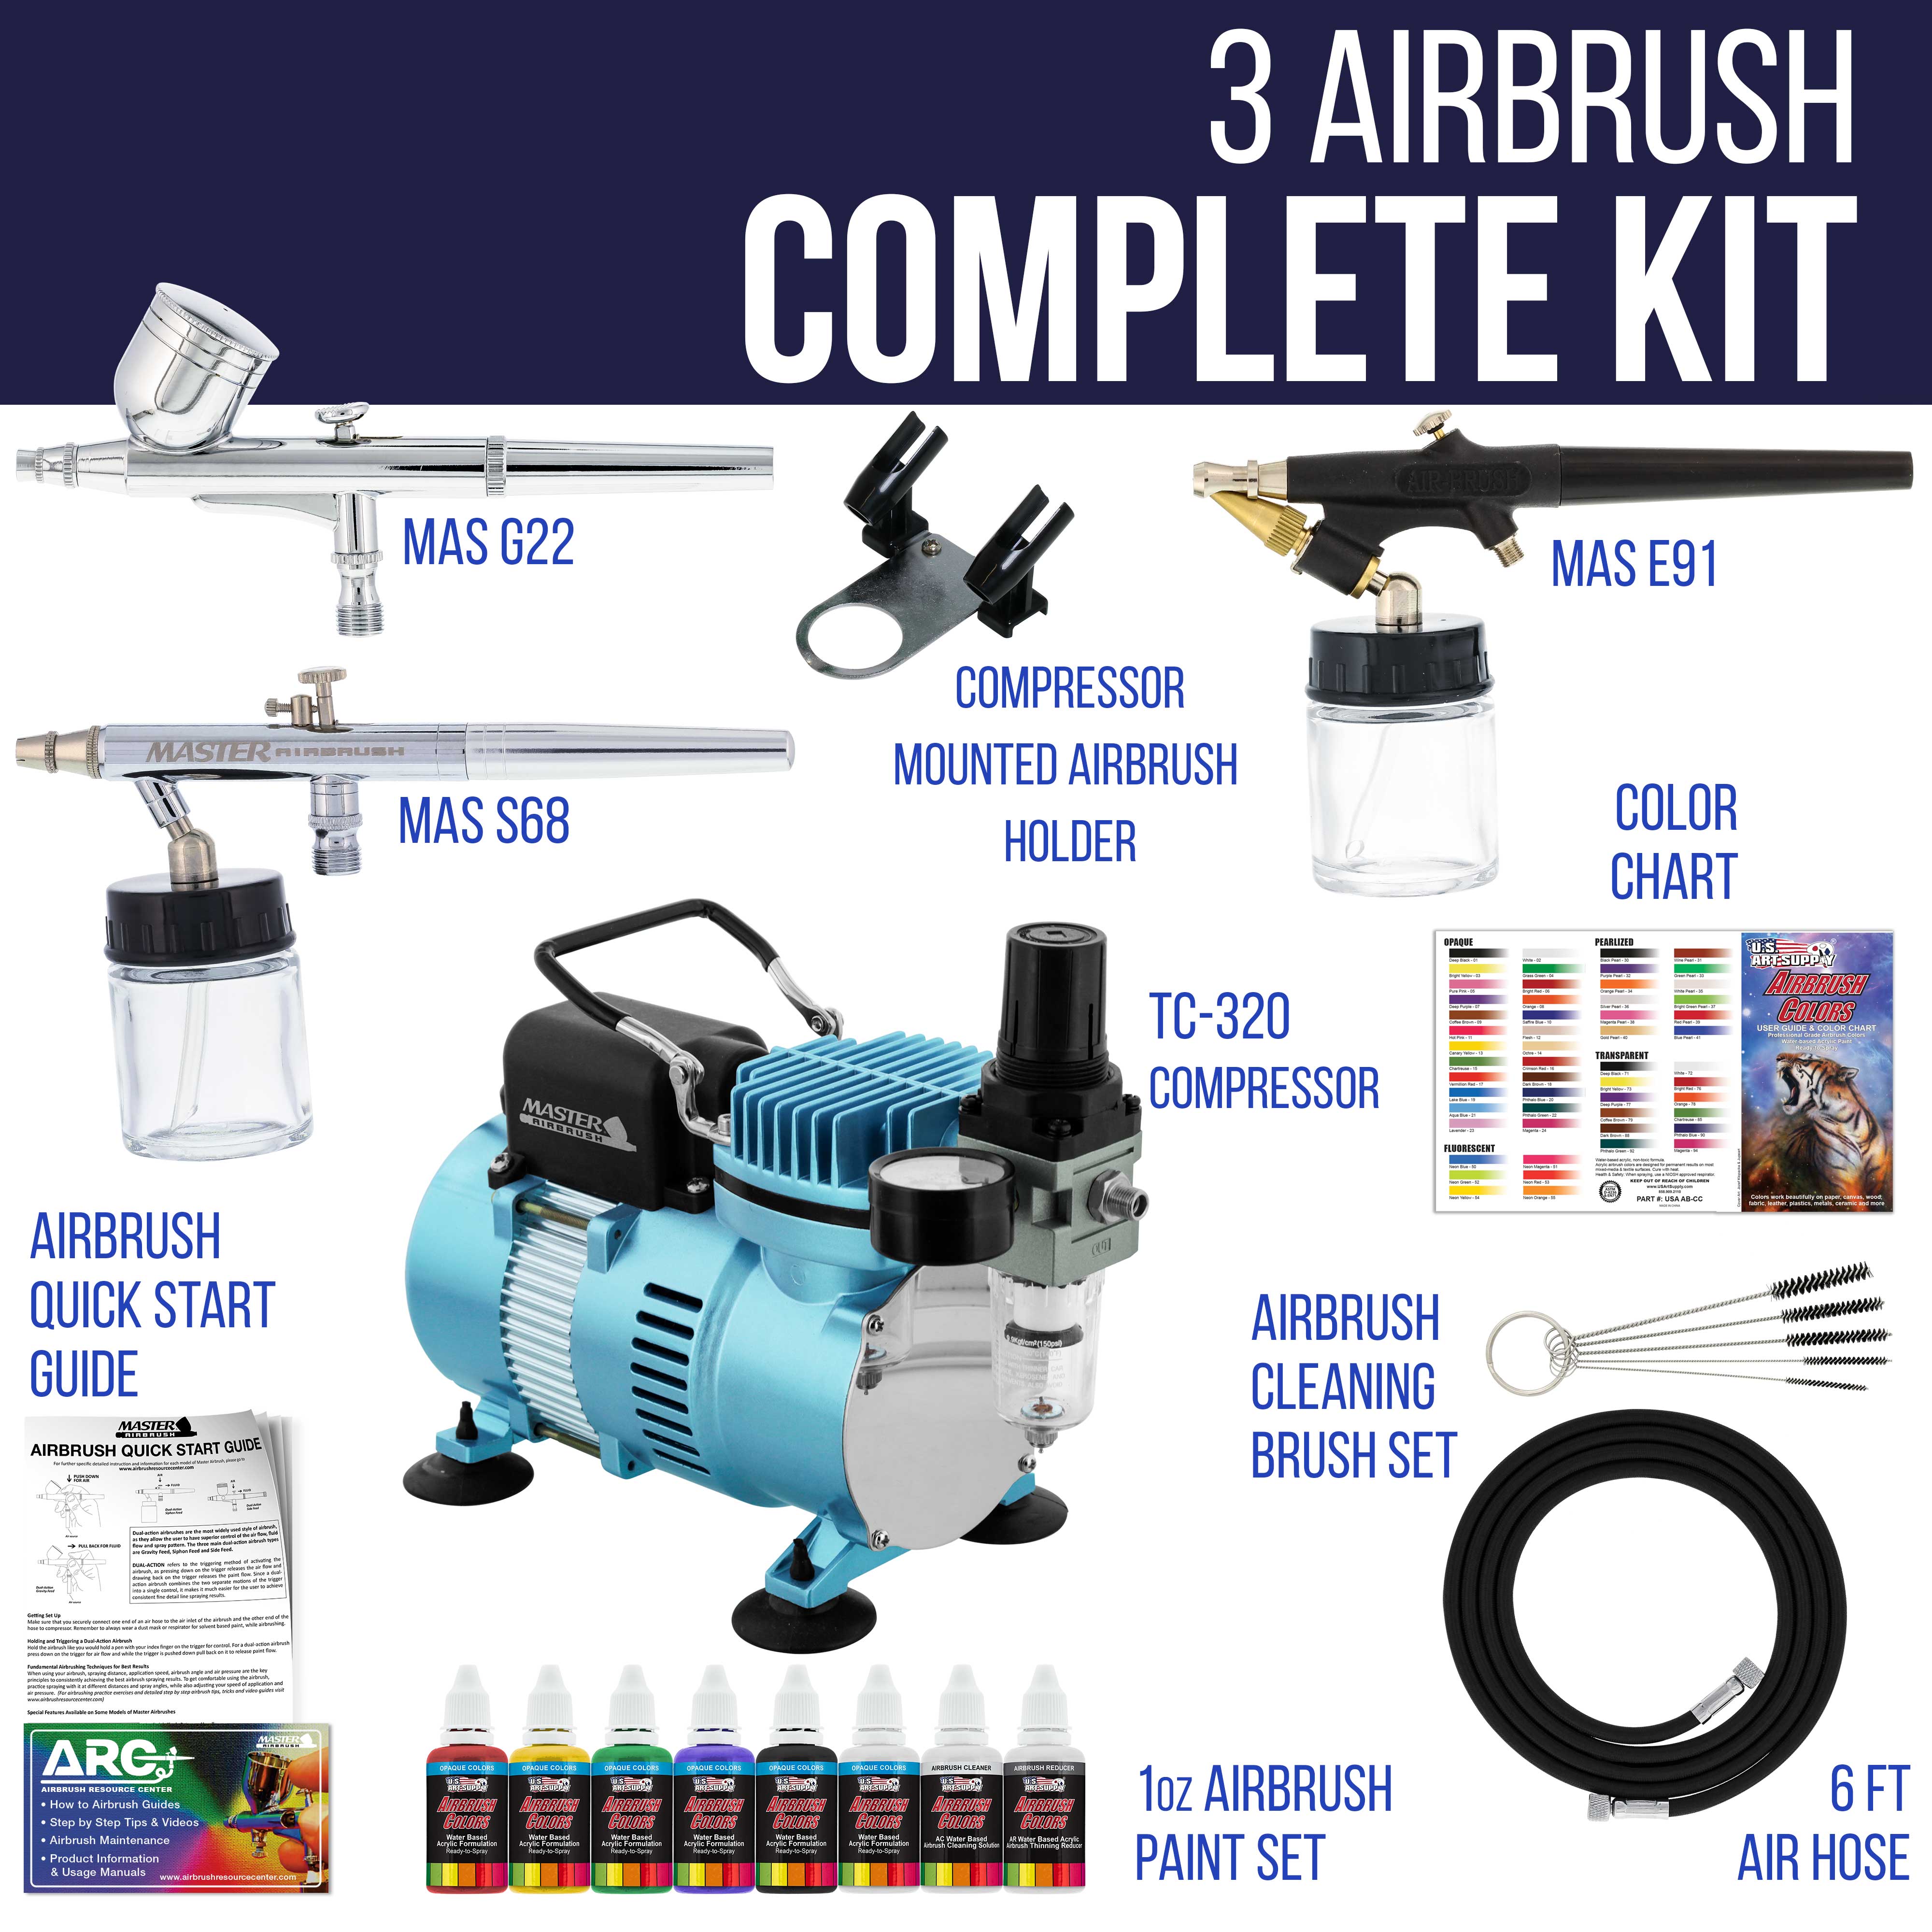 New 3 Airbrush Kit 6 Primary Colors Air Compressor Dual-Action Color Wheel Set - image 4 of 7